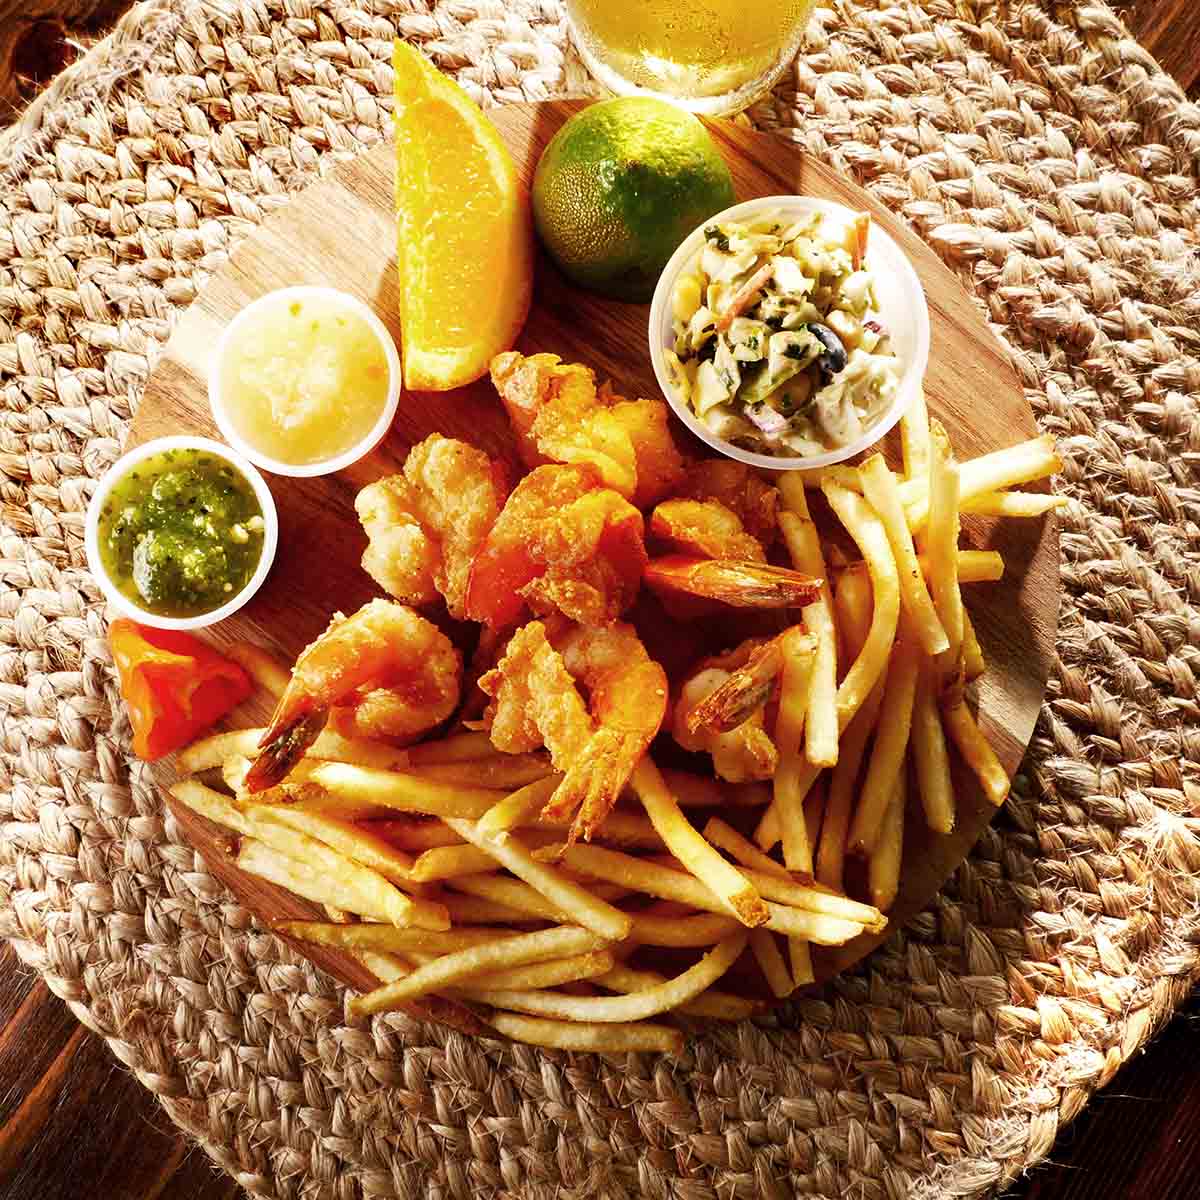 Fried crawfish with fries, sauces, citrus slices and a salad, top view